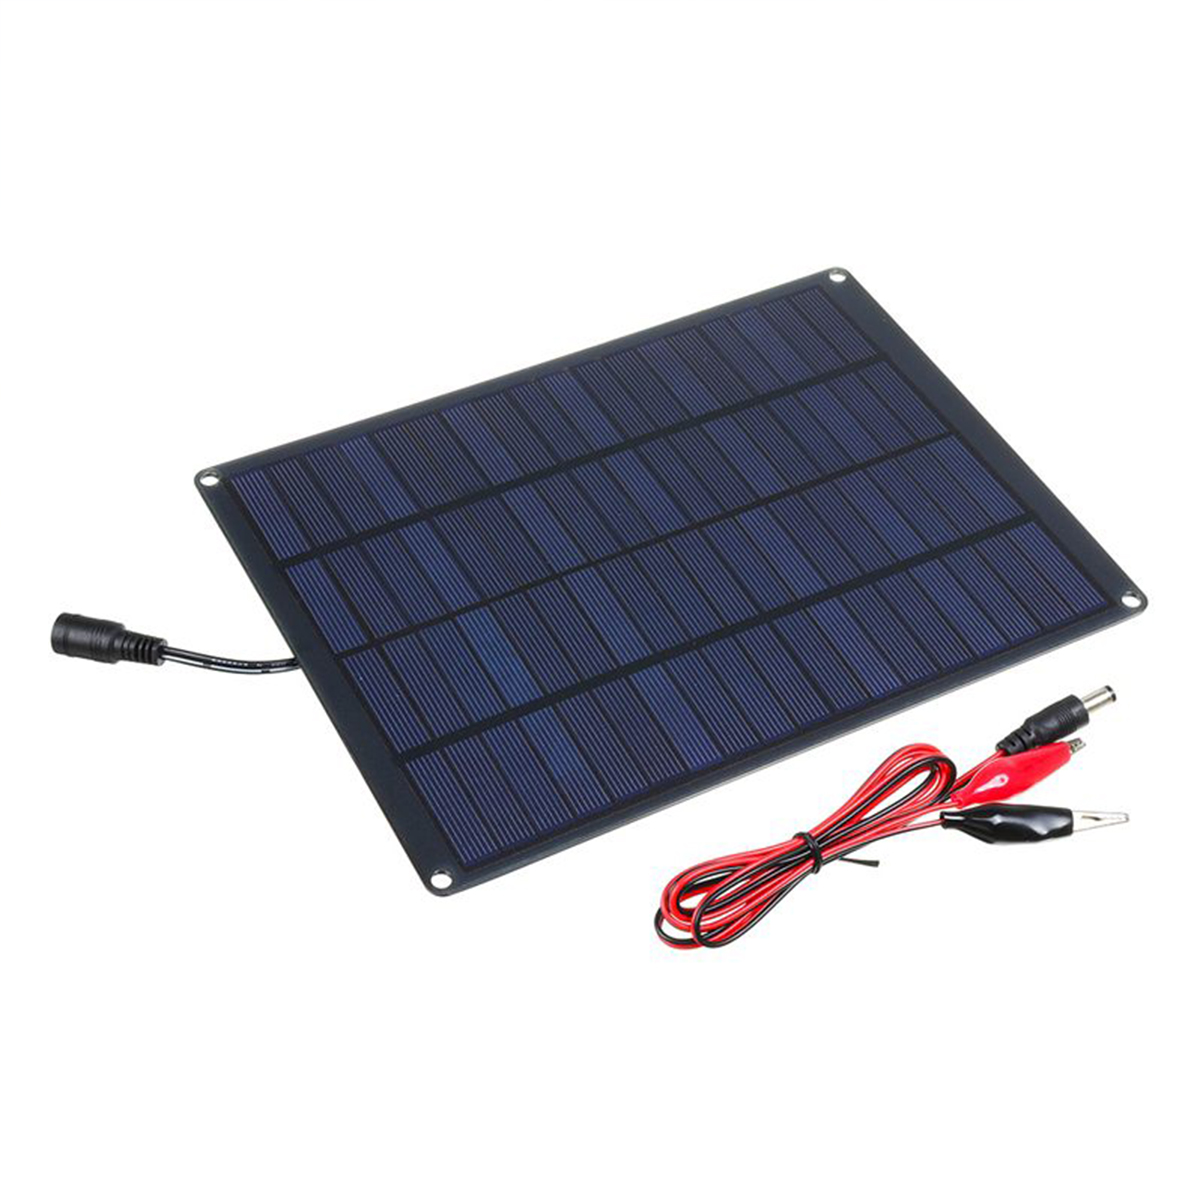 55W-12V-Durability-Waterproof-Monocrystalline-Silicon-Solar-Panel-for-Outdoor-CyclingHikingCampingTr-1565726-3